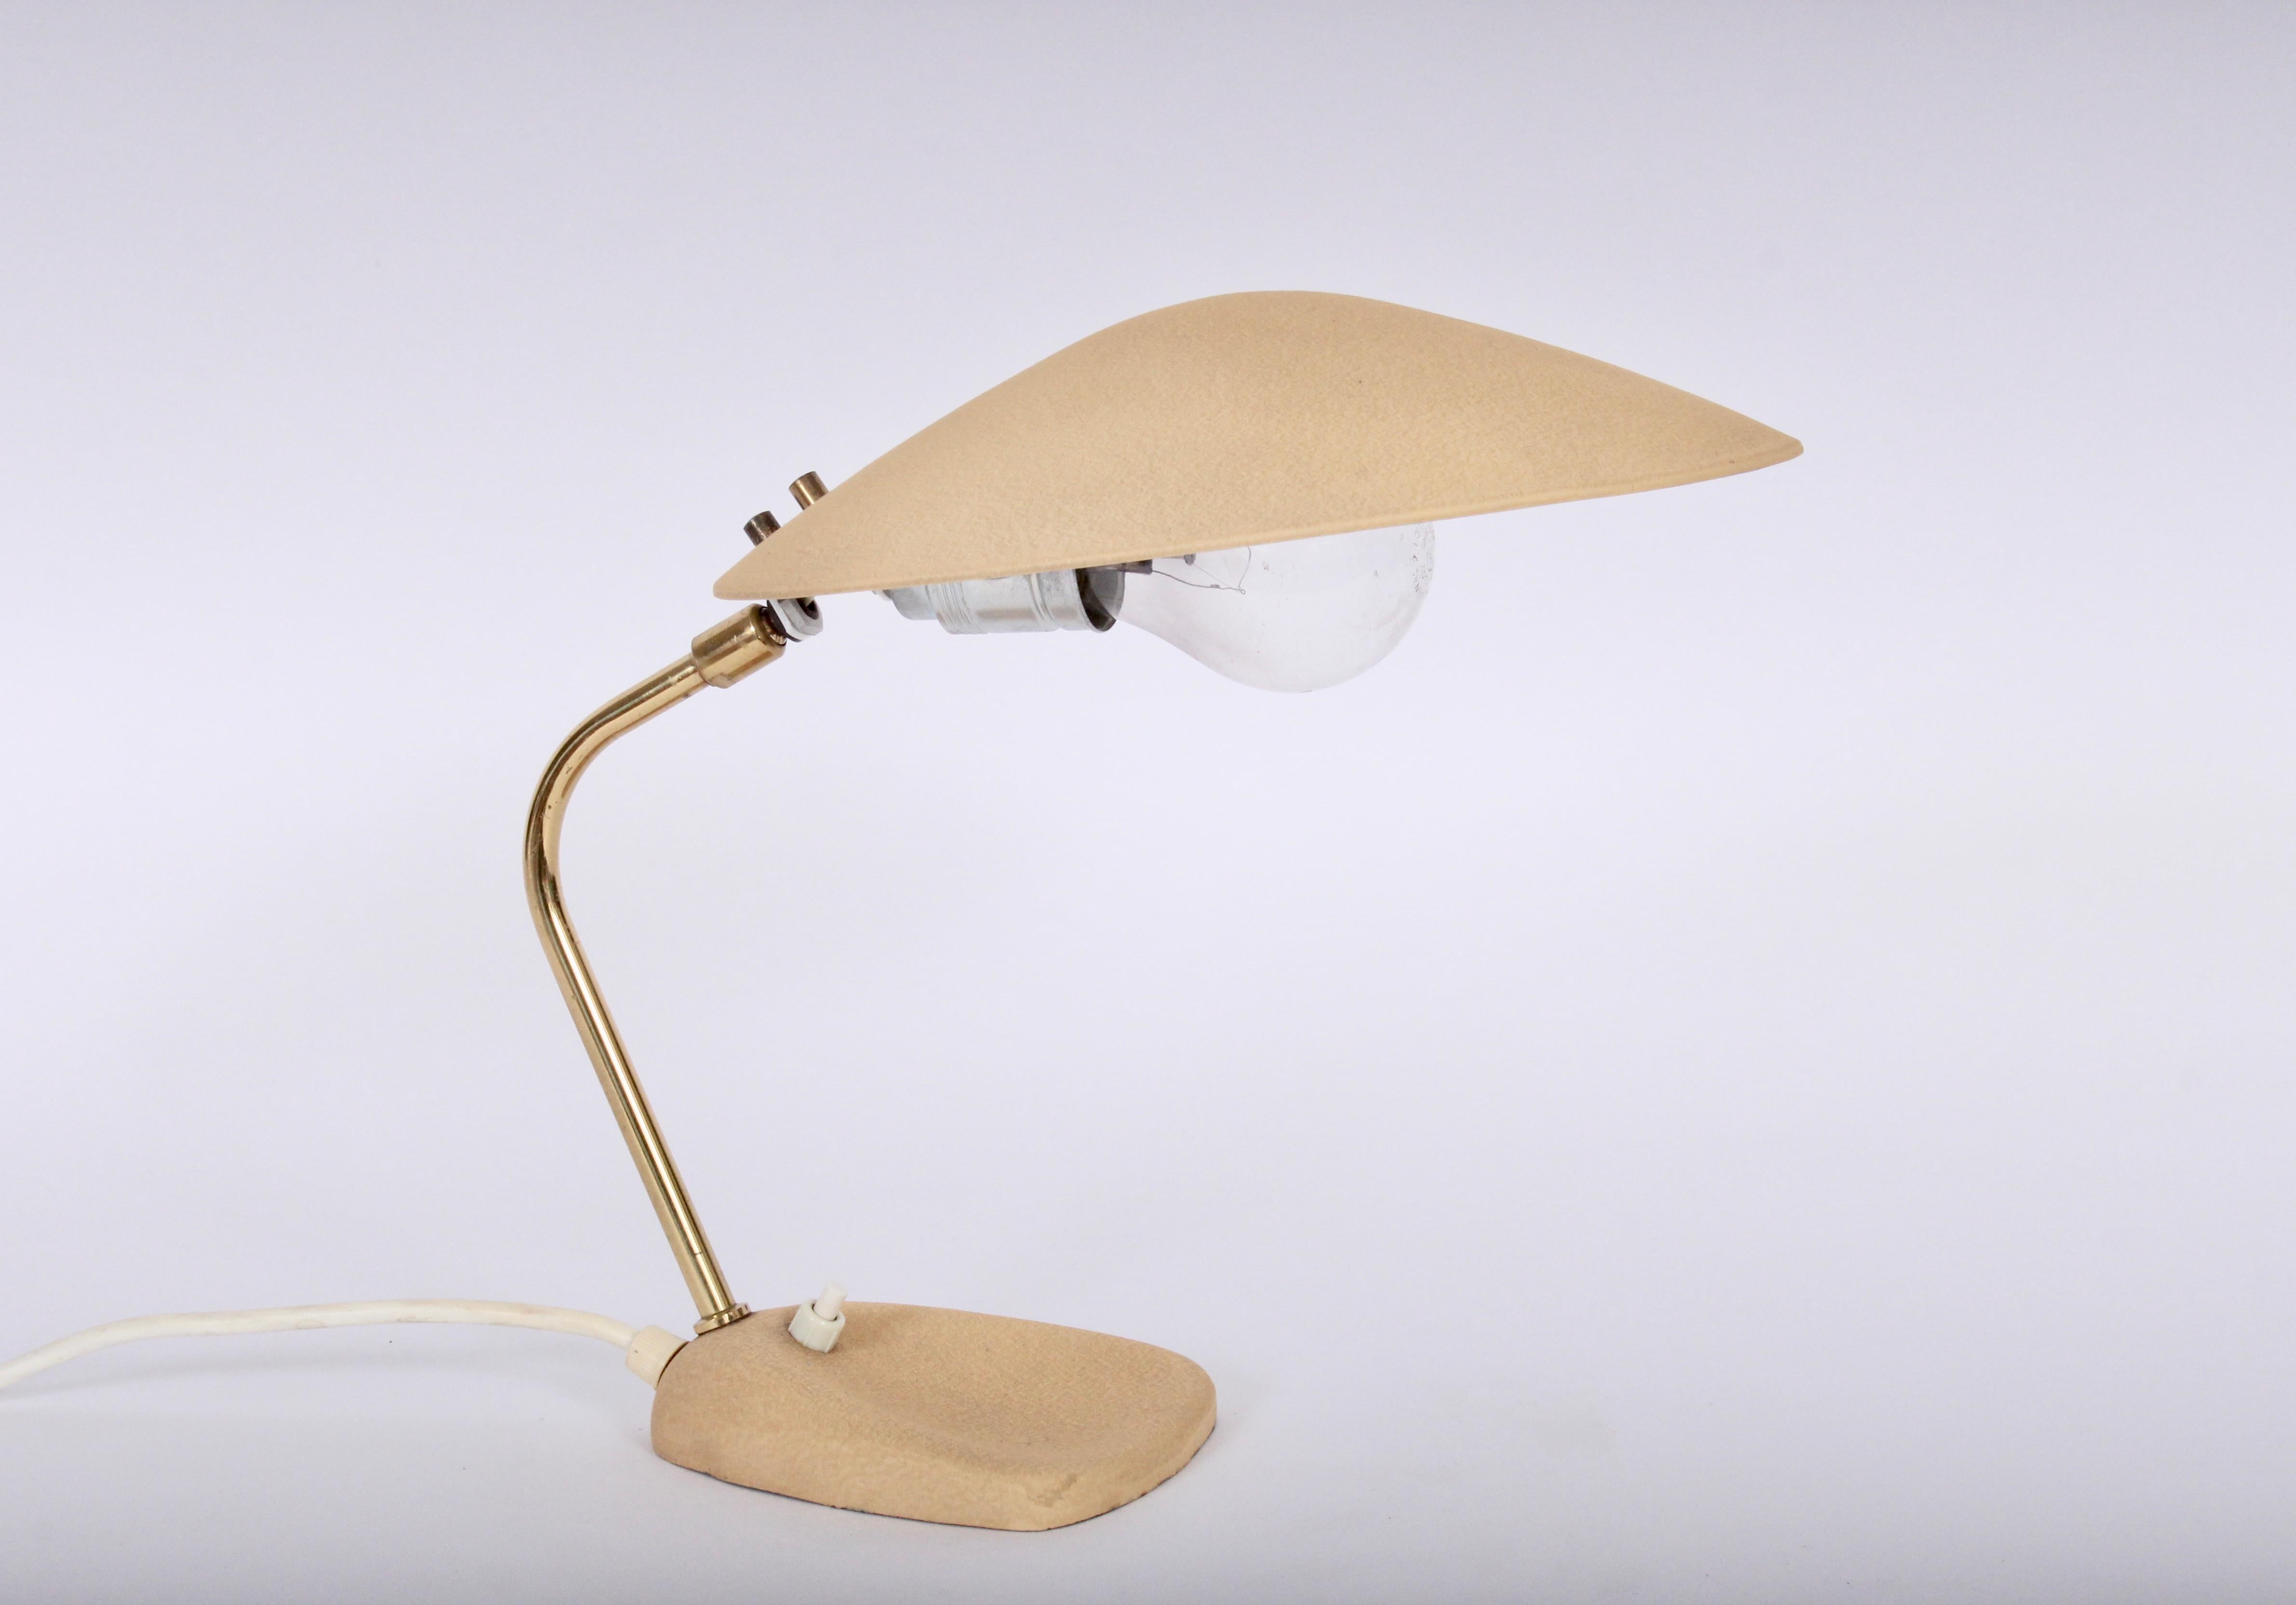 European Modern Stilnovo style adjustable enameled steel saucer shade table lamp. Featuring an adjustable Brass plated arched swing arm stem, enameled (10W) Steel swing saucer shade in textured Khaki Beige on rounded, balanced triangular base (5.5 x